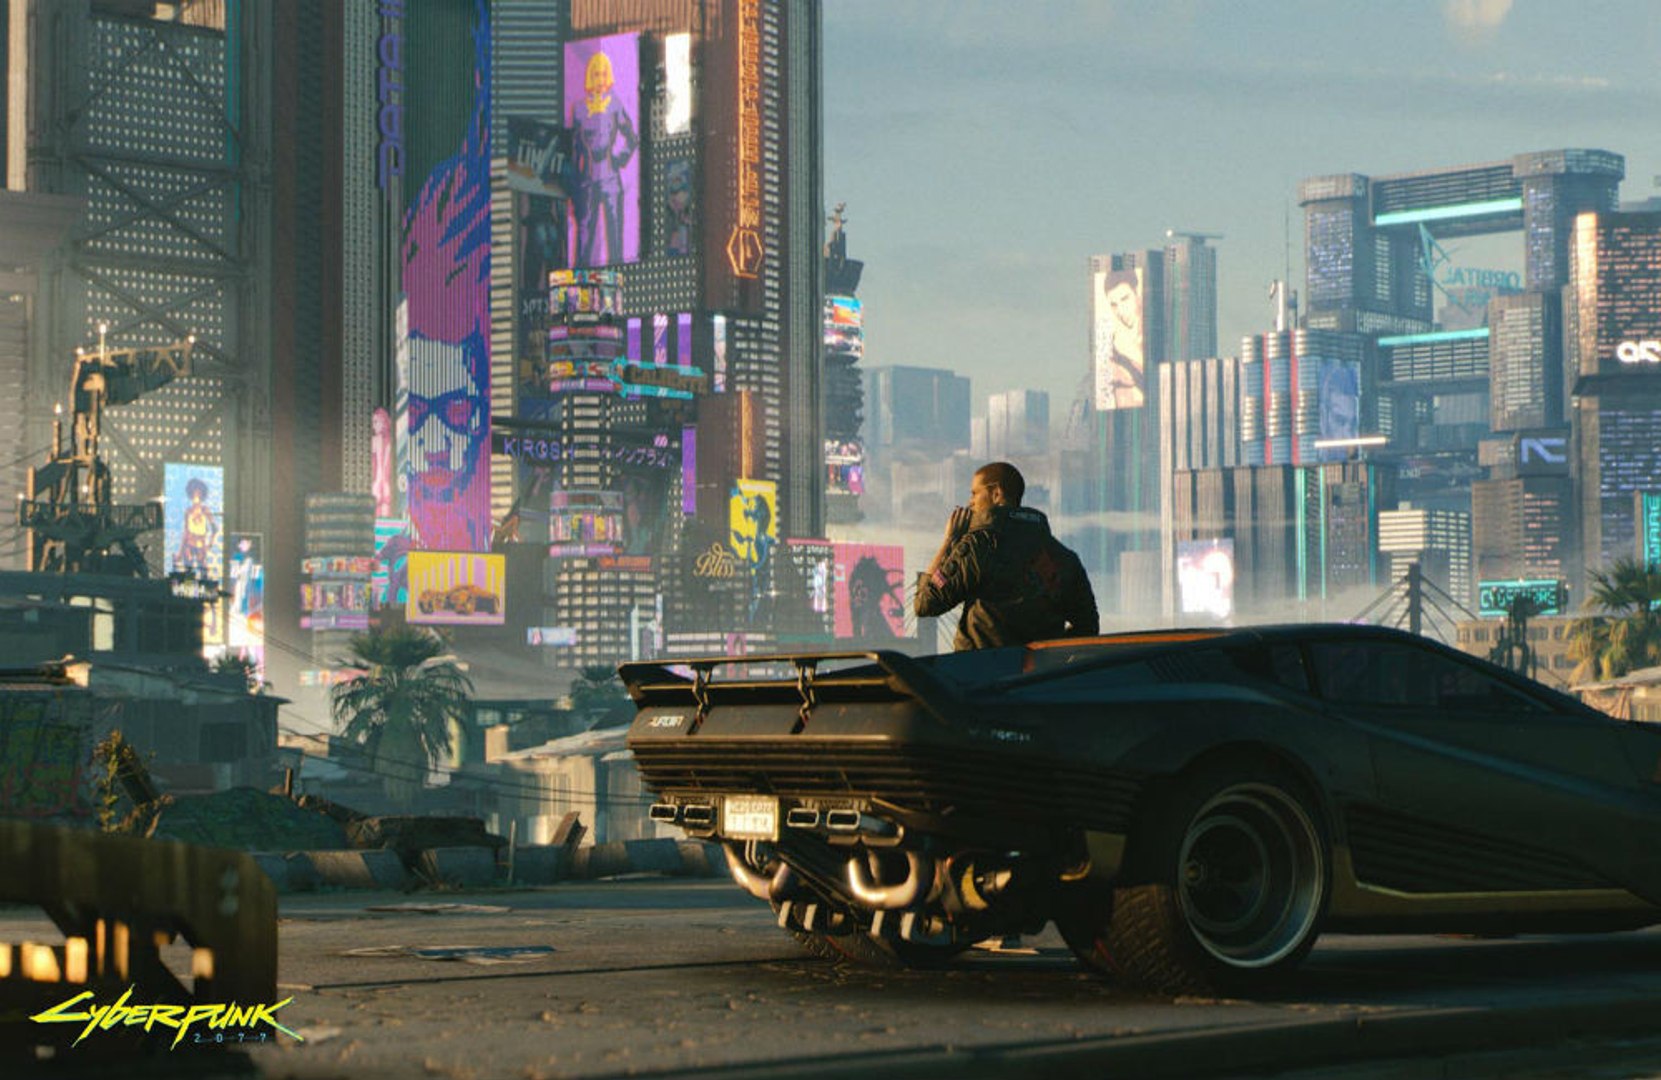 Cyberpunk 2077 and CDPR receive support from Gabe Newell